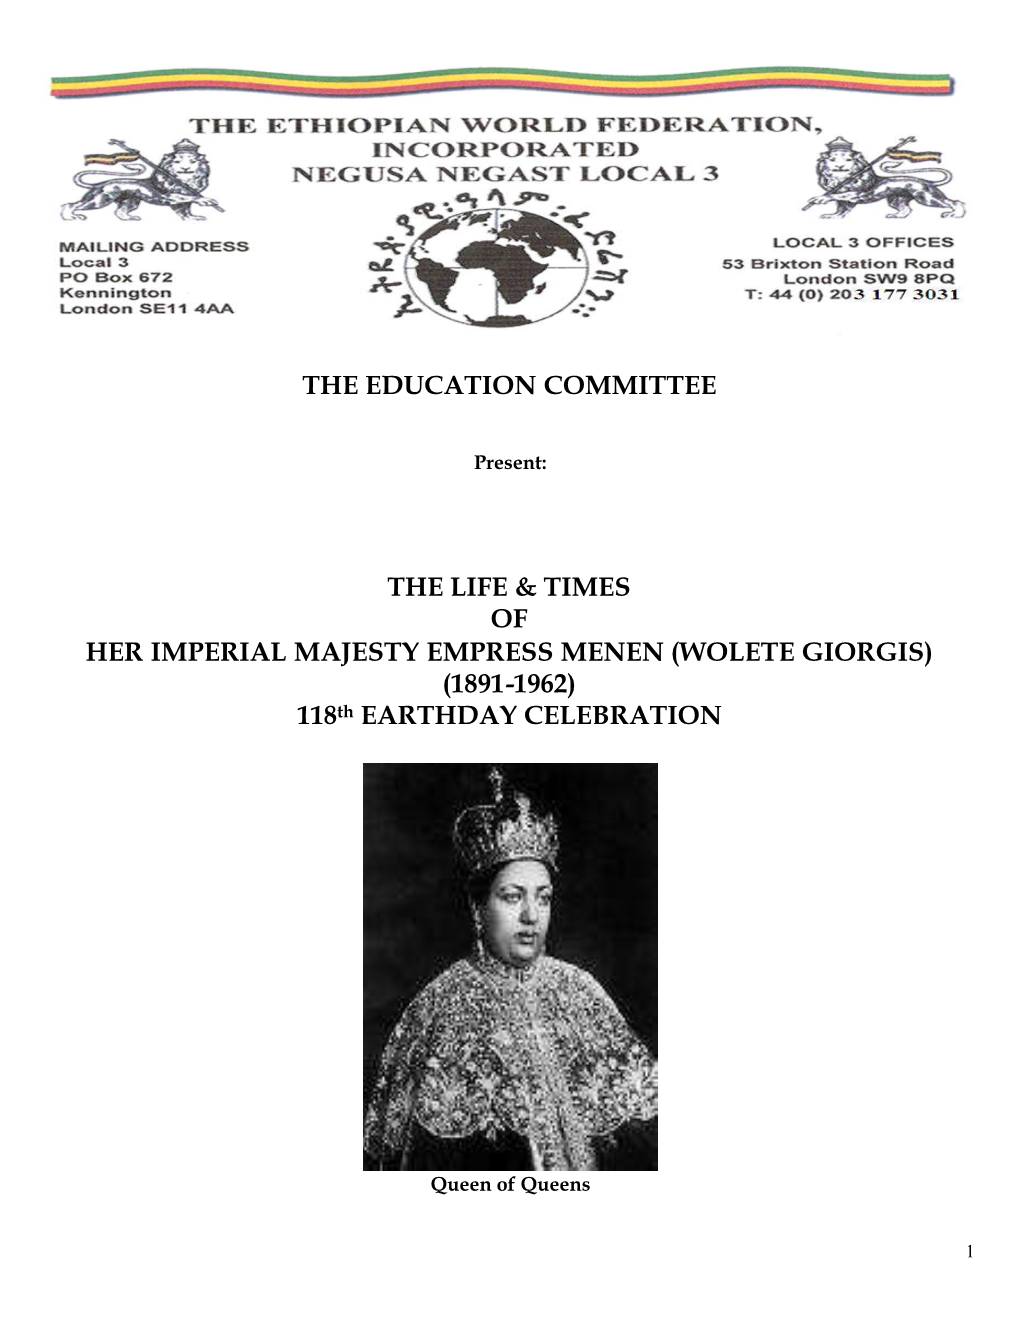 The Life & Times of Her Imperial Majesty Empress Menen (Wolete Giorgis)